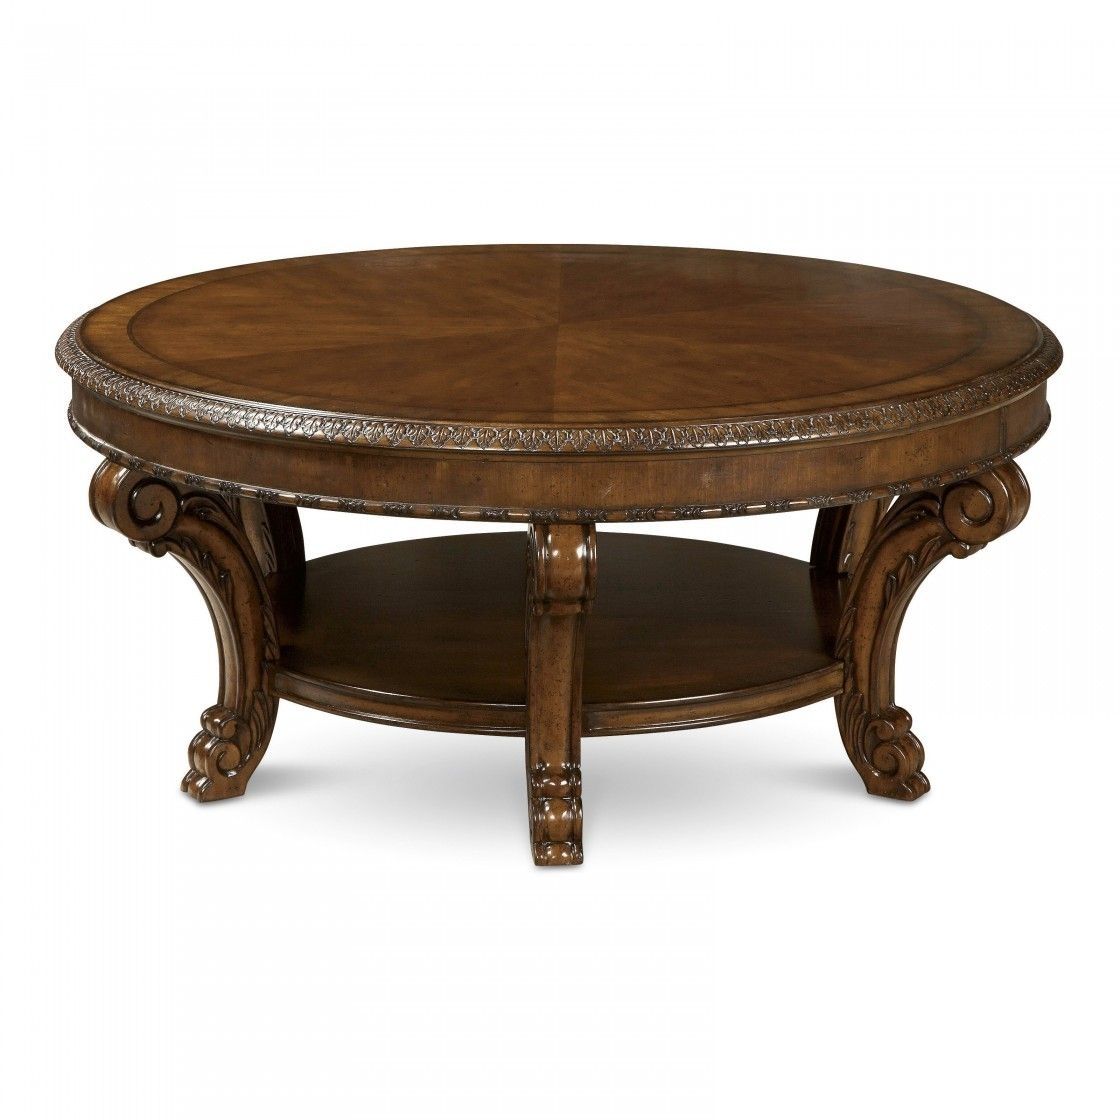 Amazing Luxury High Gloss Finished Brown Wooden Furniture Hand Pertaining To Round Carved Wood Coffee Tables (View 11 of 30)